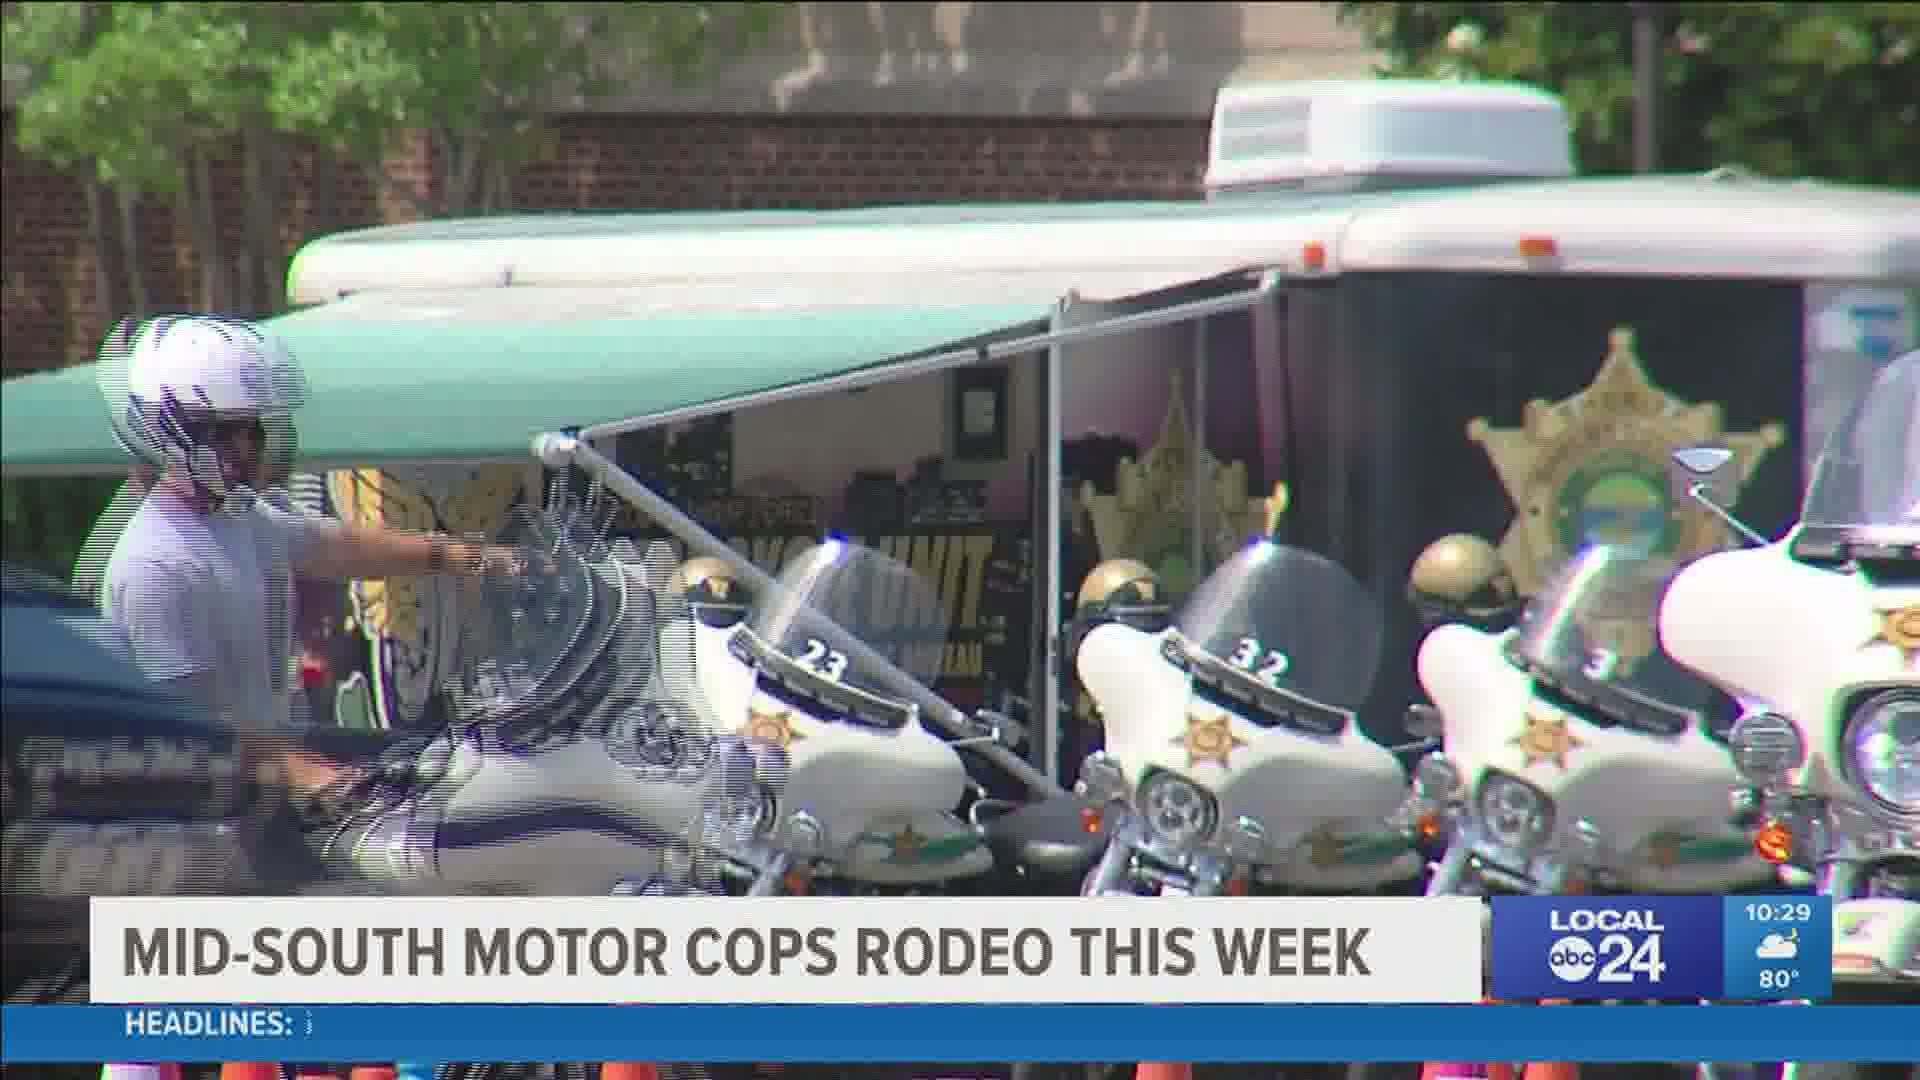 The Mid-South Motor Cops Rodeo, which is this week in Southaven, will benefit the family of Memphis Police Officer Scotty Triplett.